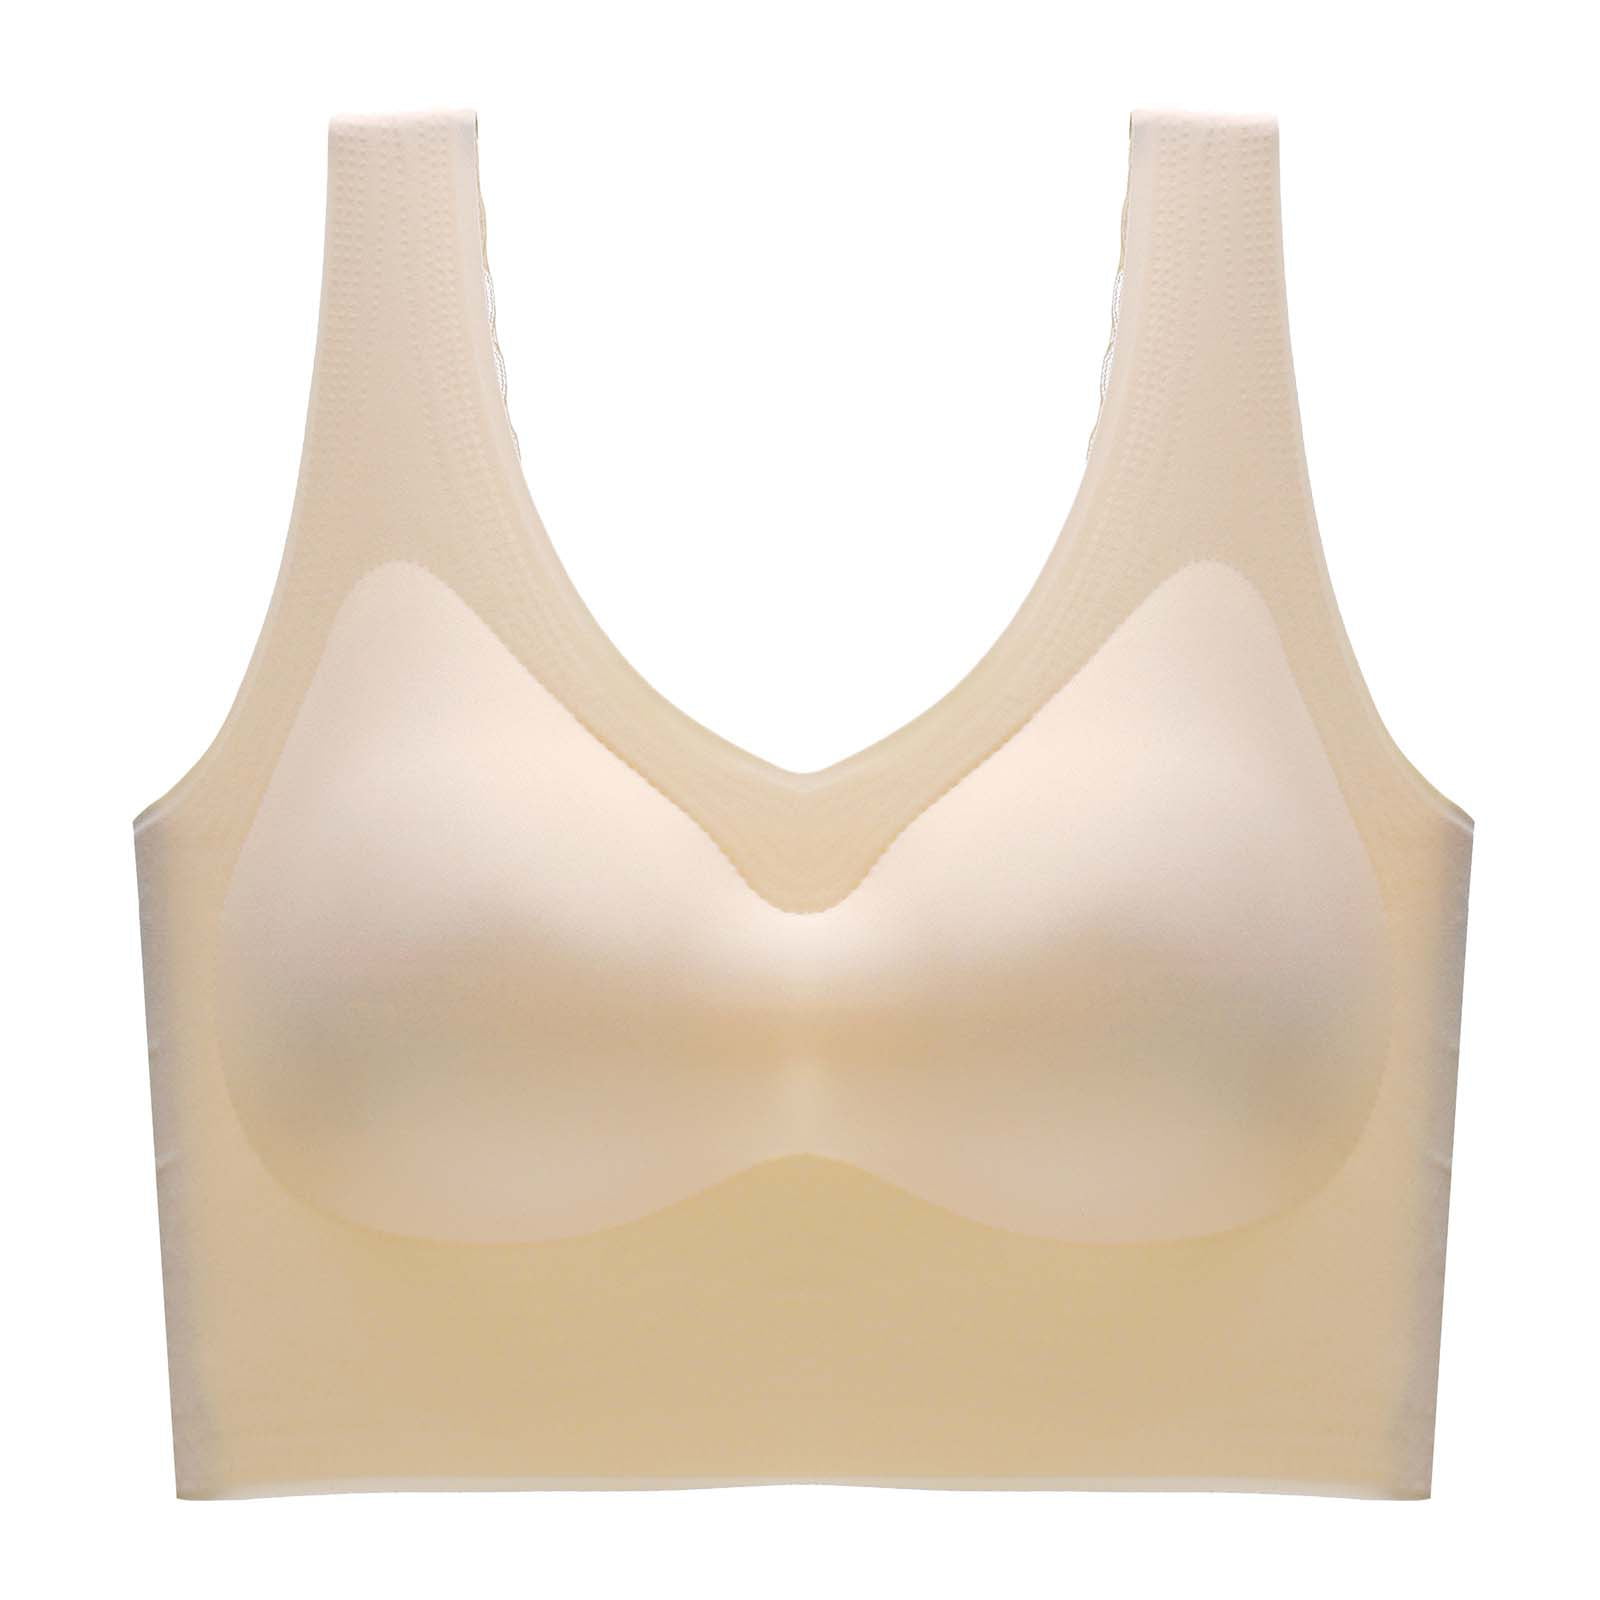 CAICJ98 Lingerie for Women Naughty Women's Marks Jelly Underwire Latex and  No Underwear Glue Bra without Semi-Liquid Beige,XL